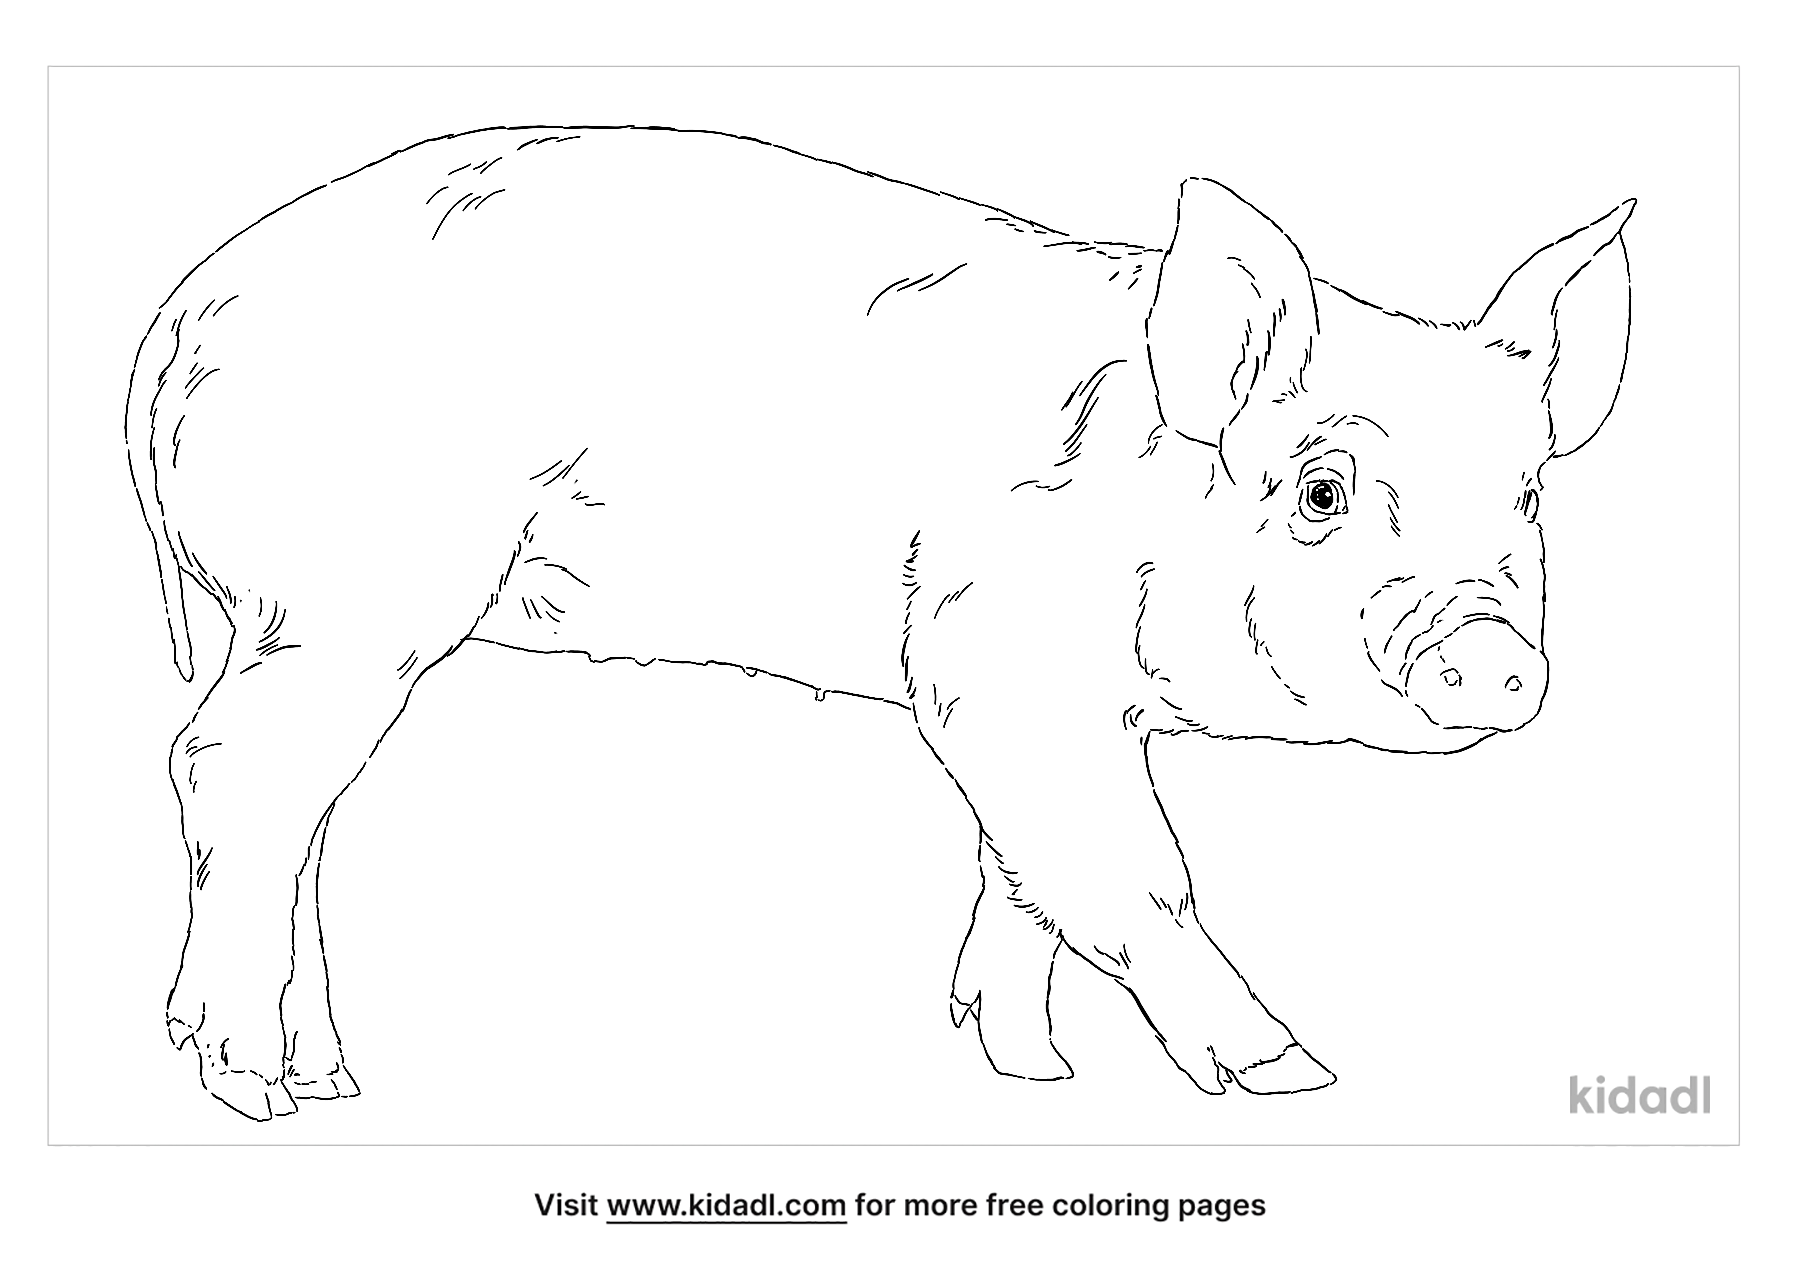 Pigs Coloring Pages | Free Animals Coloring Pages | Kidadl